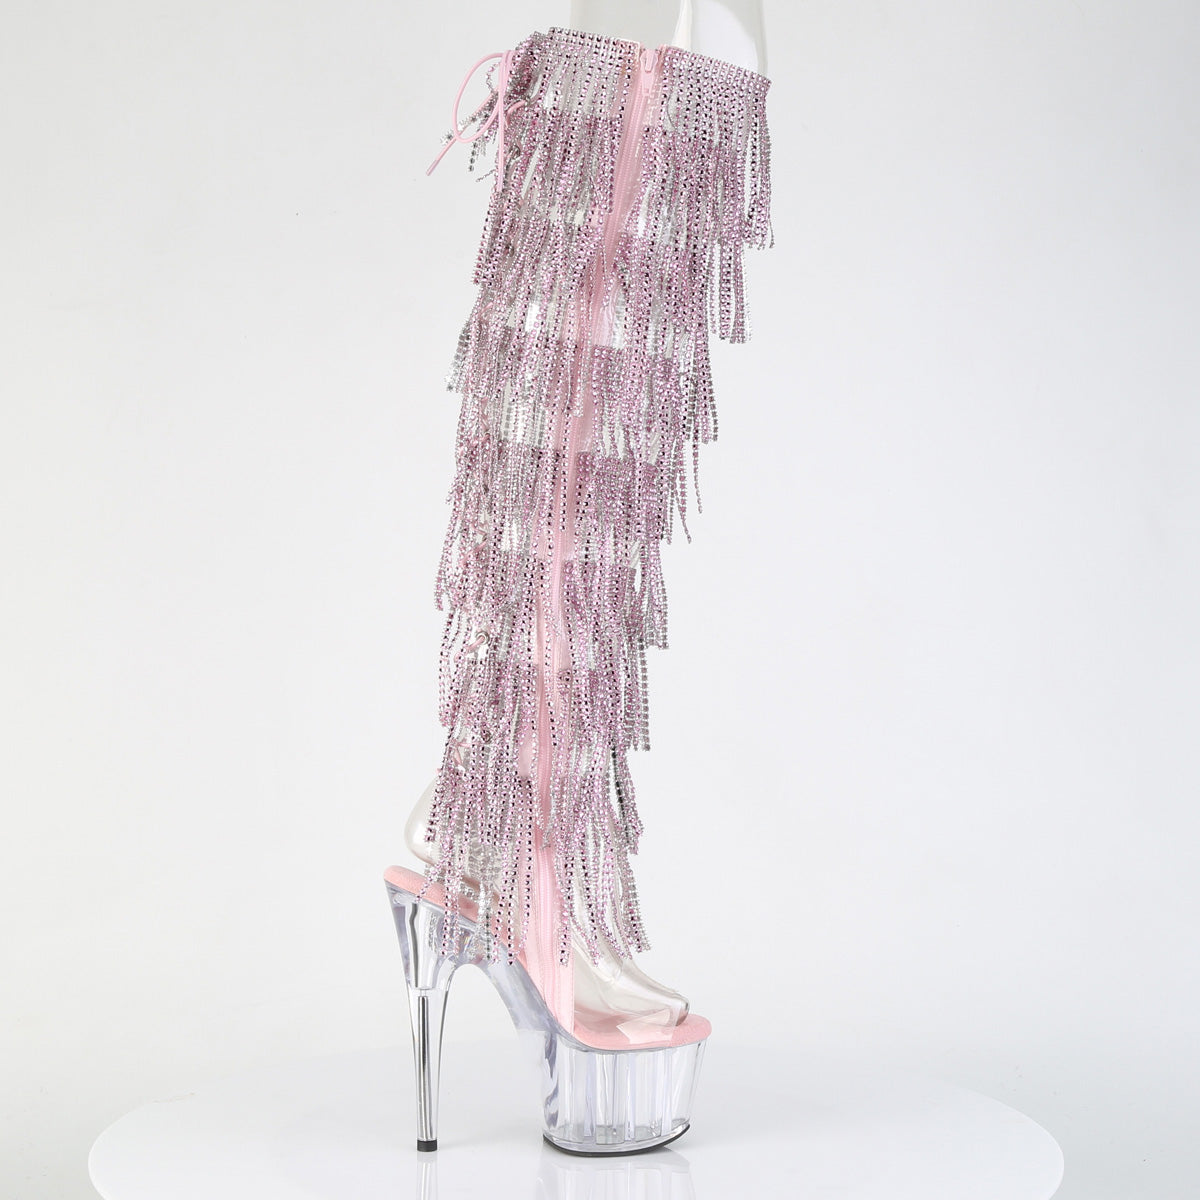 Rhinestone Fringes Over The Knee Boots ADORE-3019C-RSF Pink